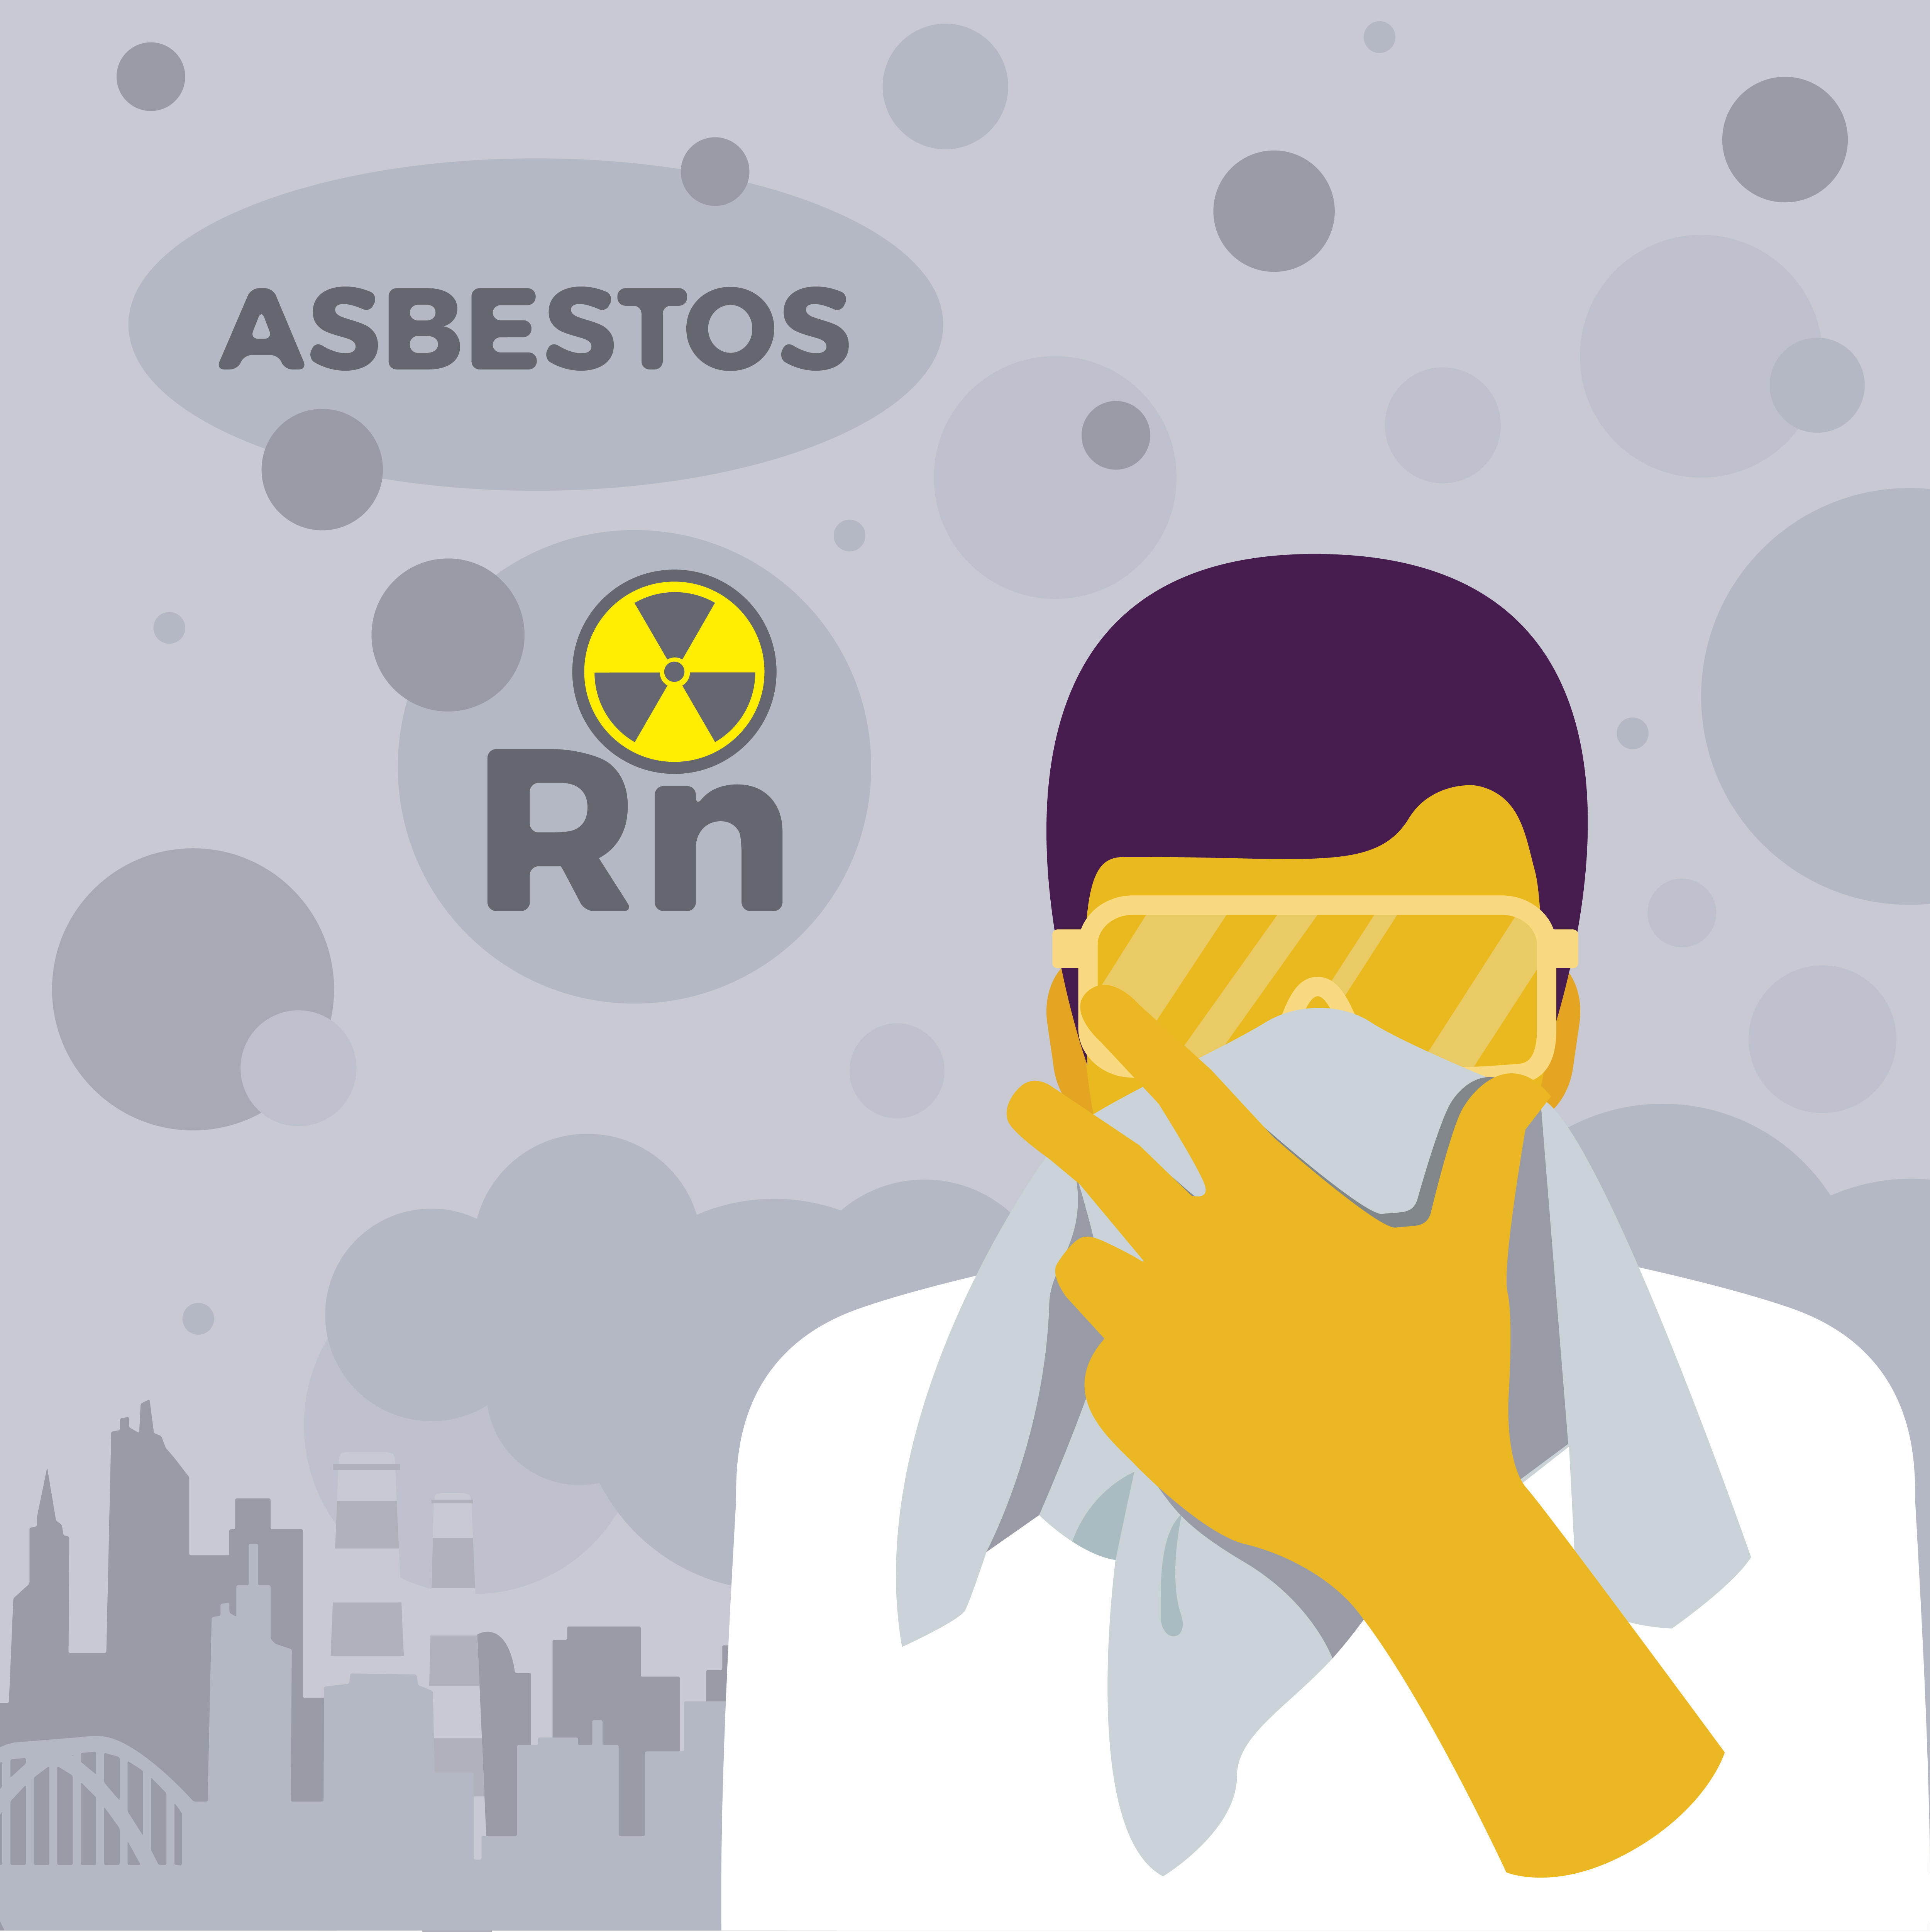 A worker covering their mouth with a rag due to the presence of asbestos (shown by the chemical symbol Rn)